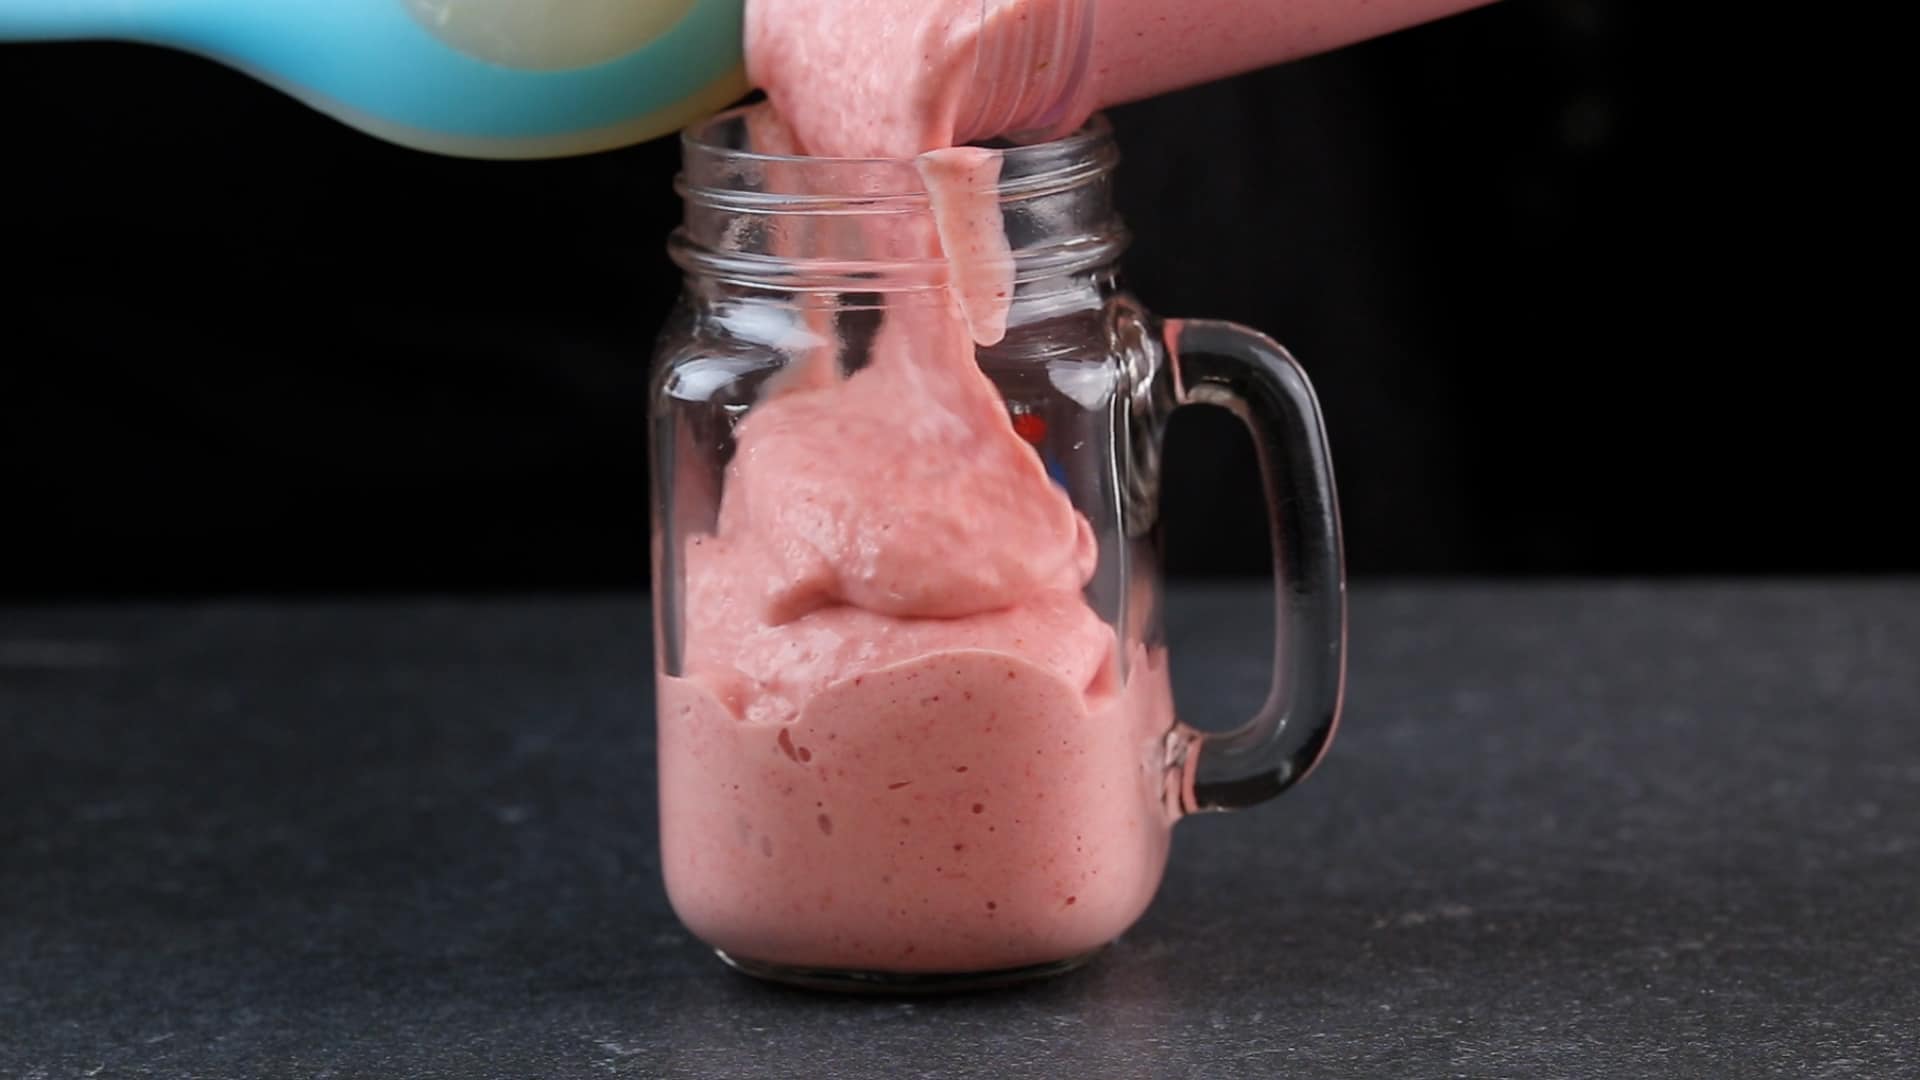 A close-up of pouring a smoothie in a glass jar.